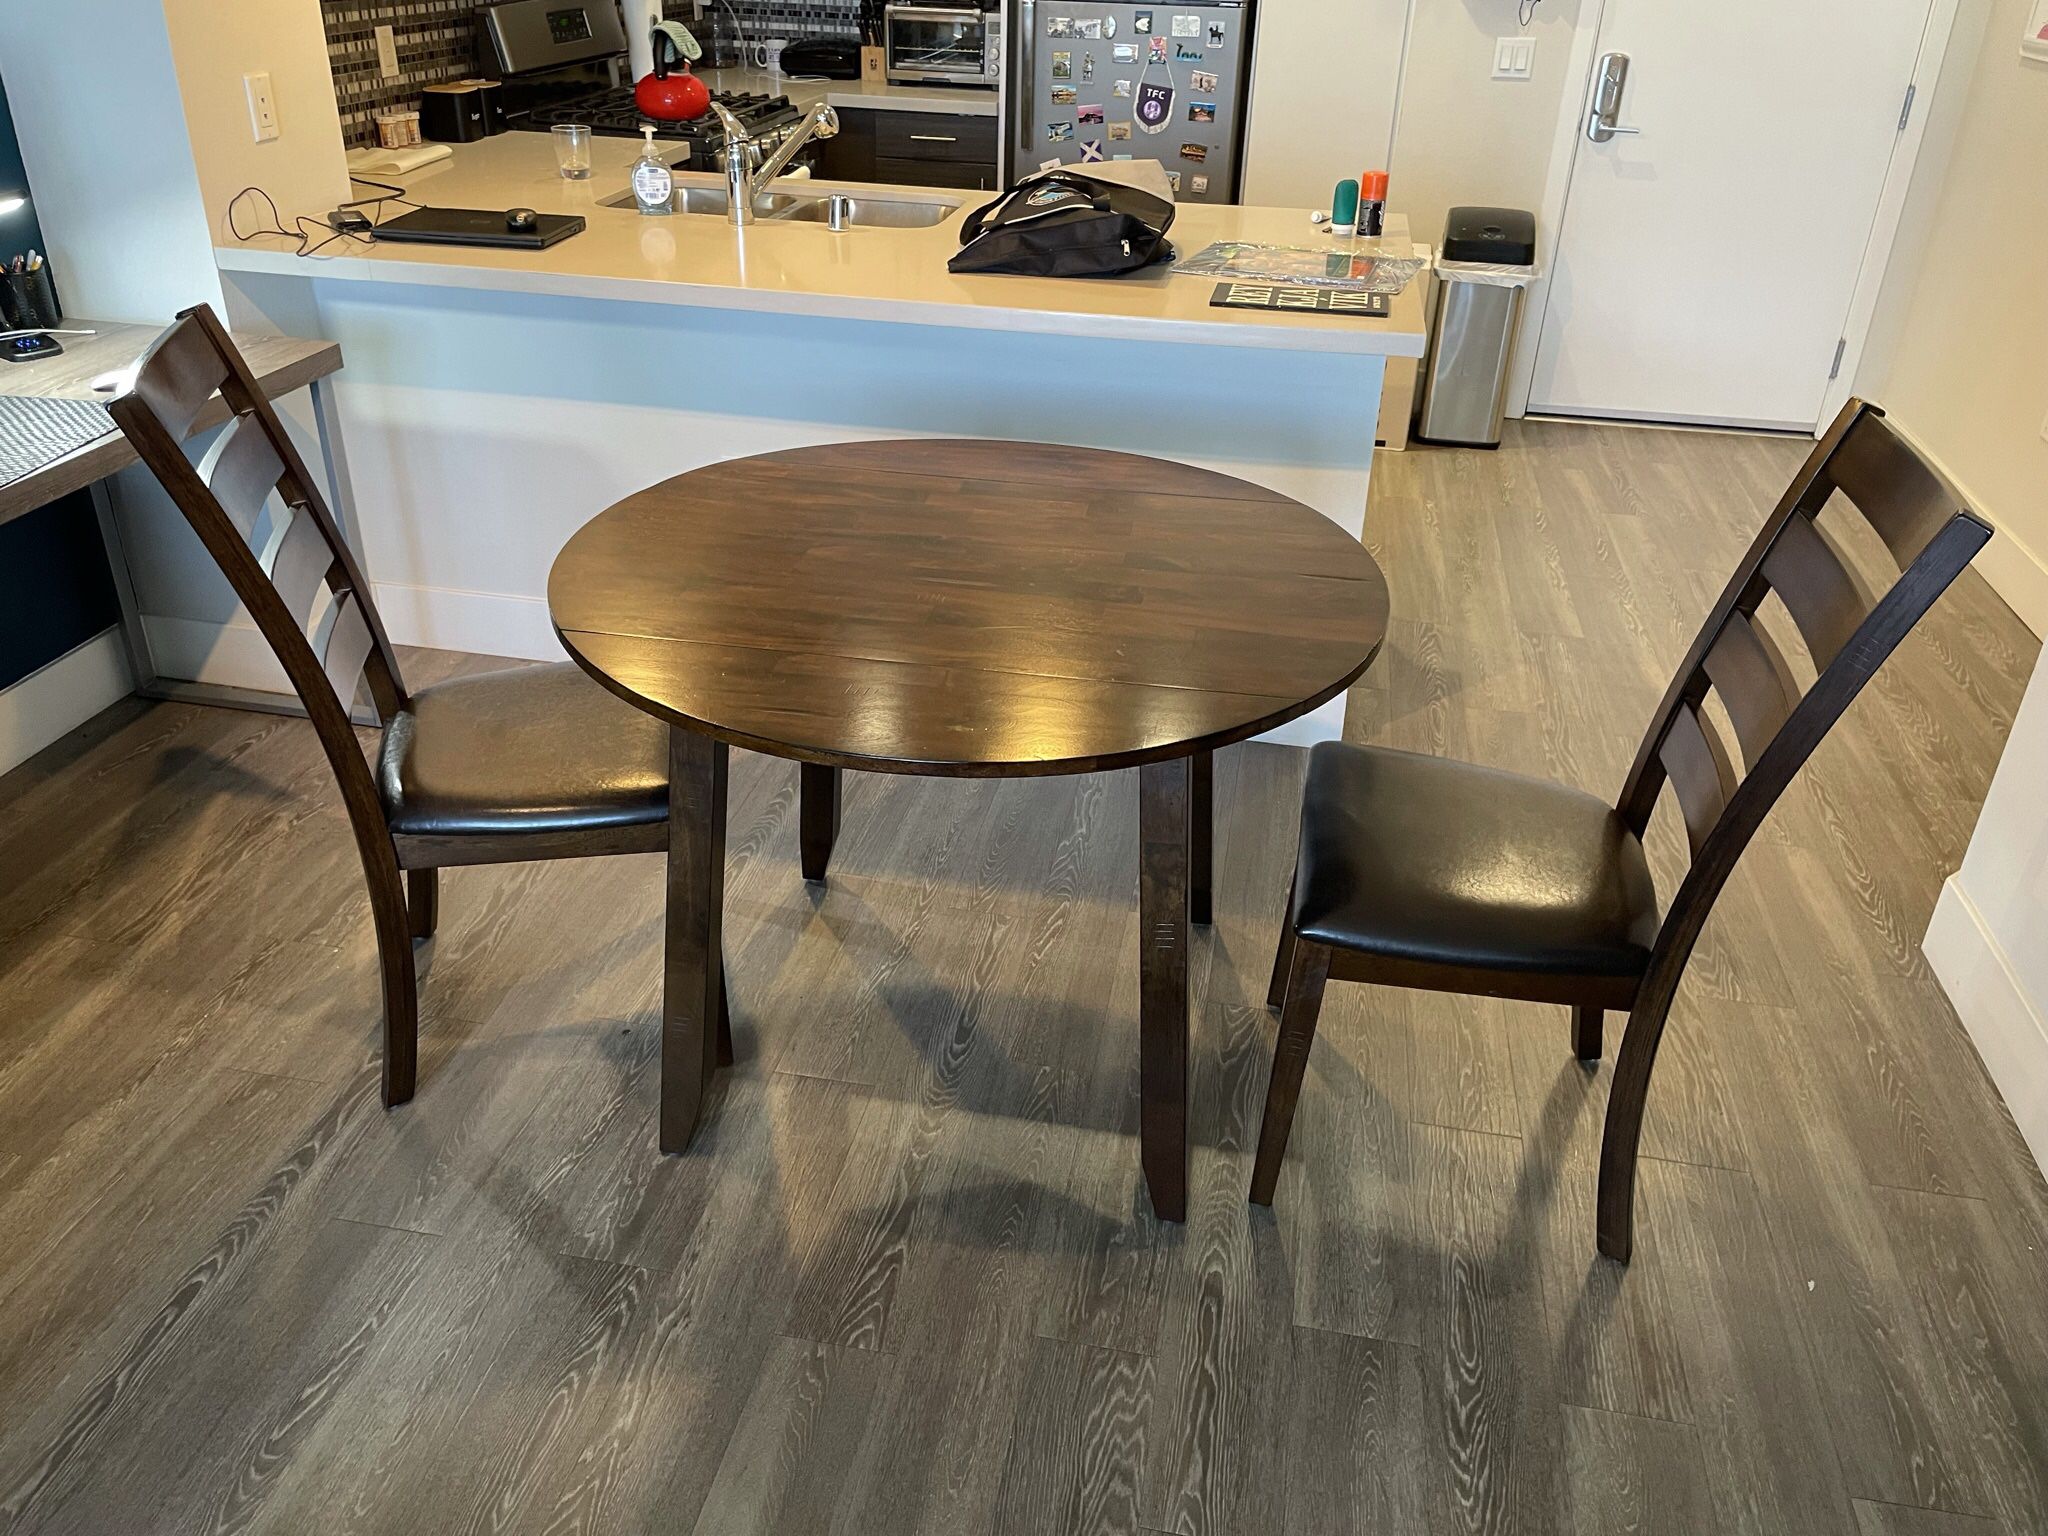 Kitchen Table For Small Places 48” Diameter With 2 Chairs